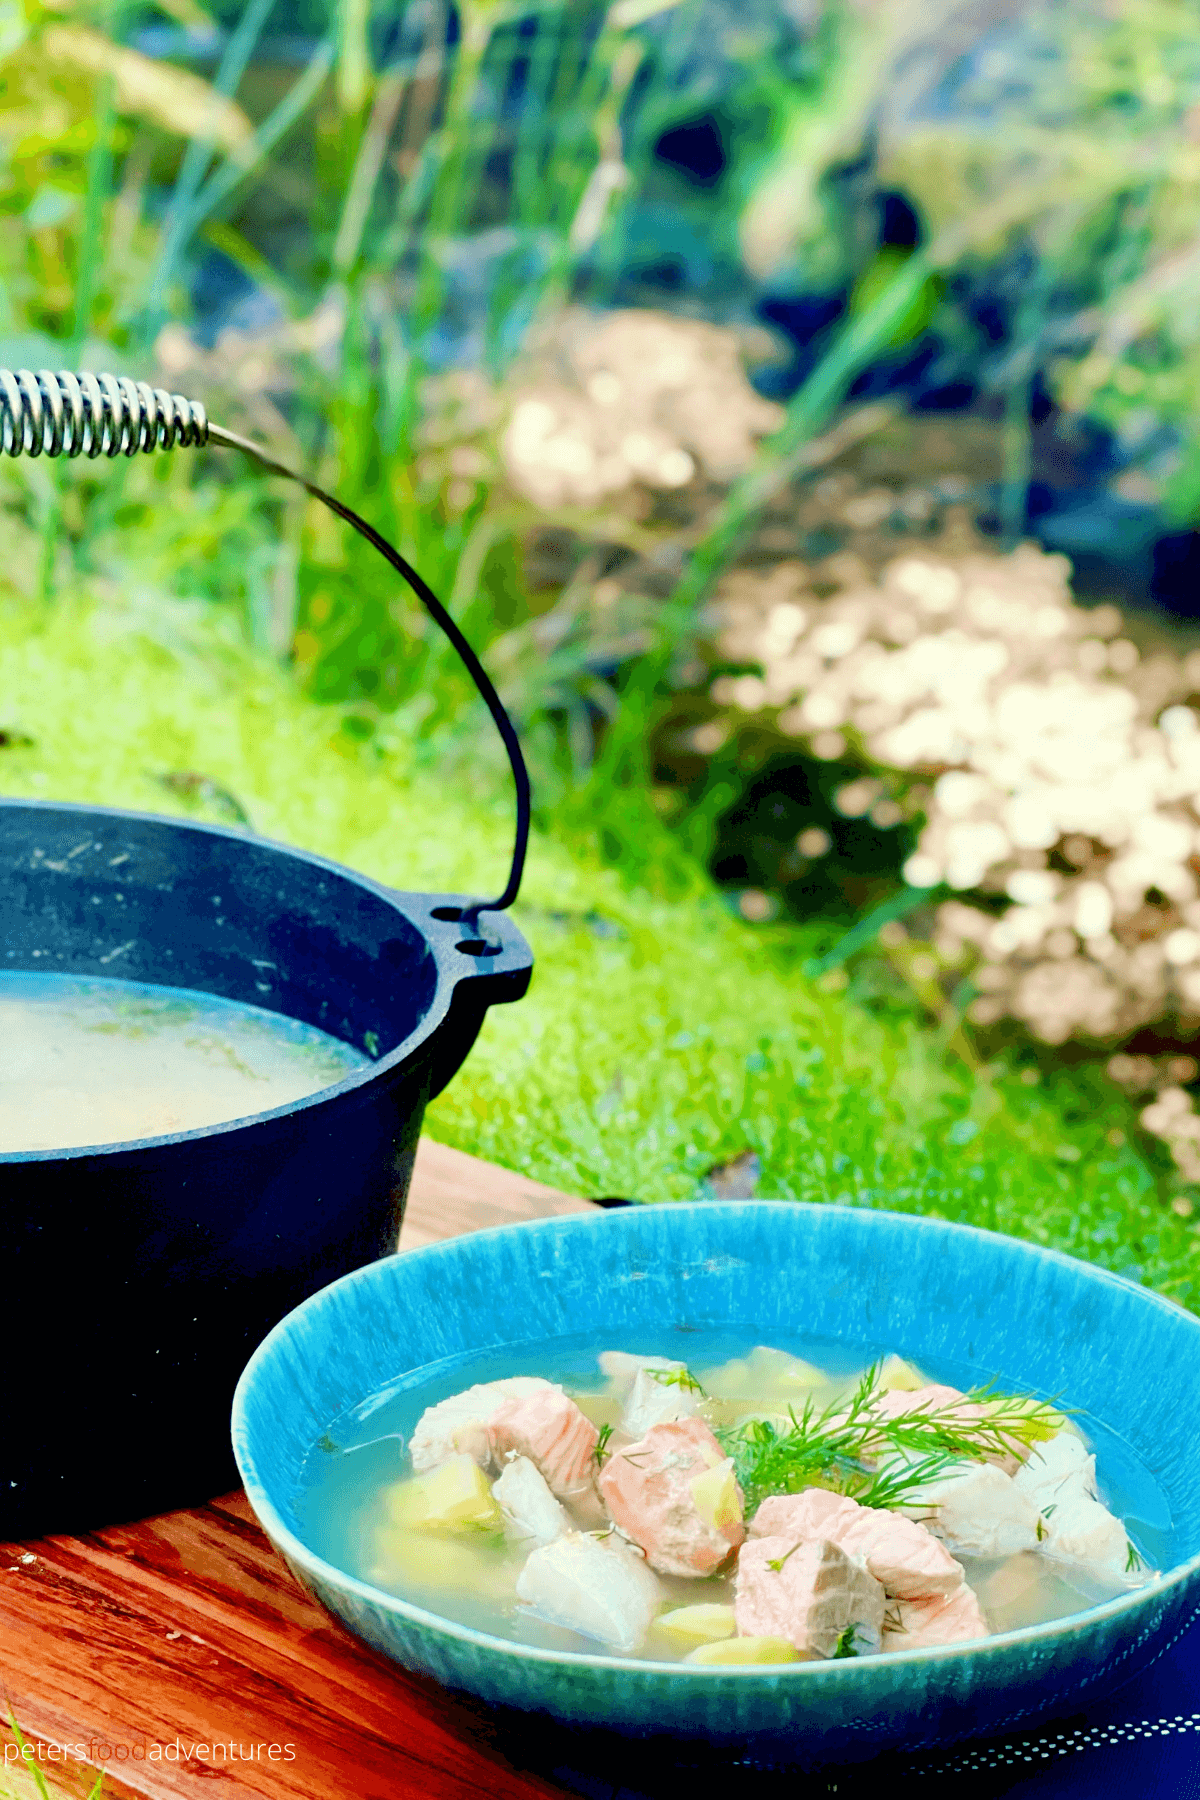 Bowl of Fish soup on a cutting board on green grass